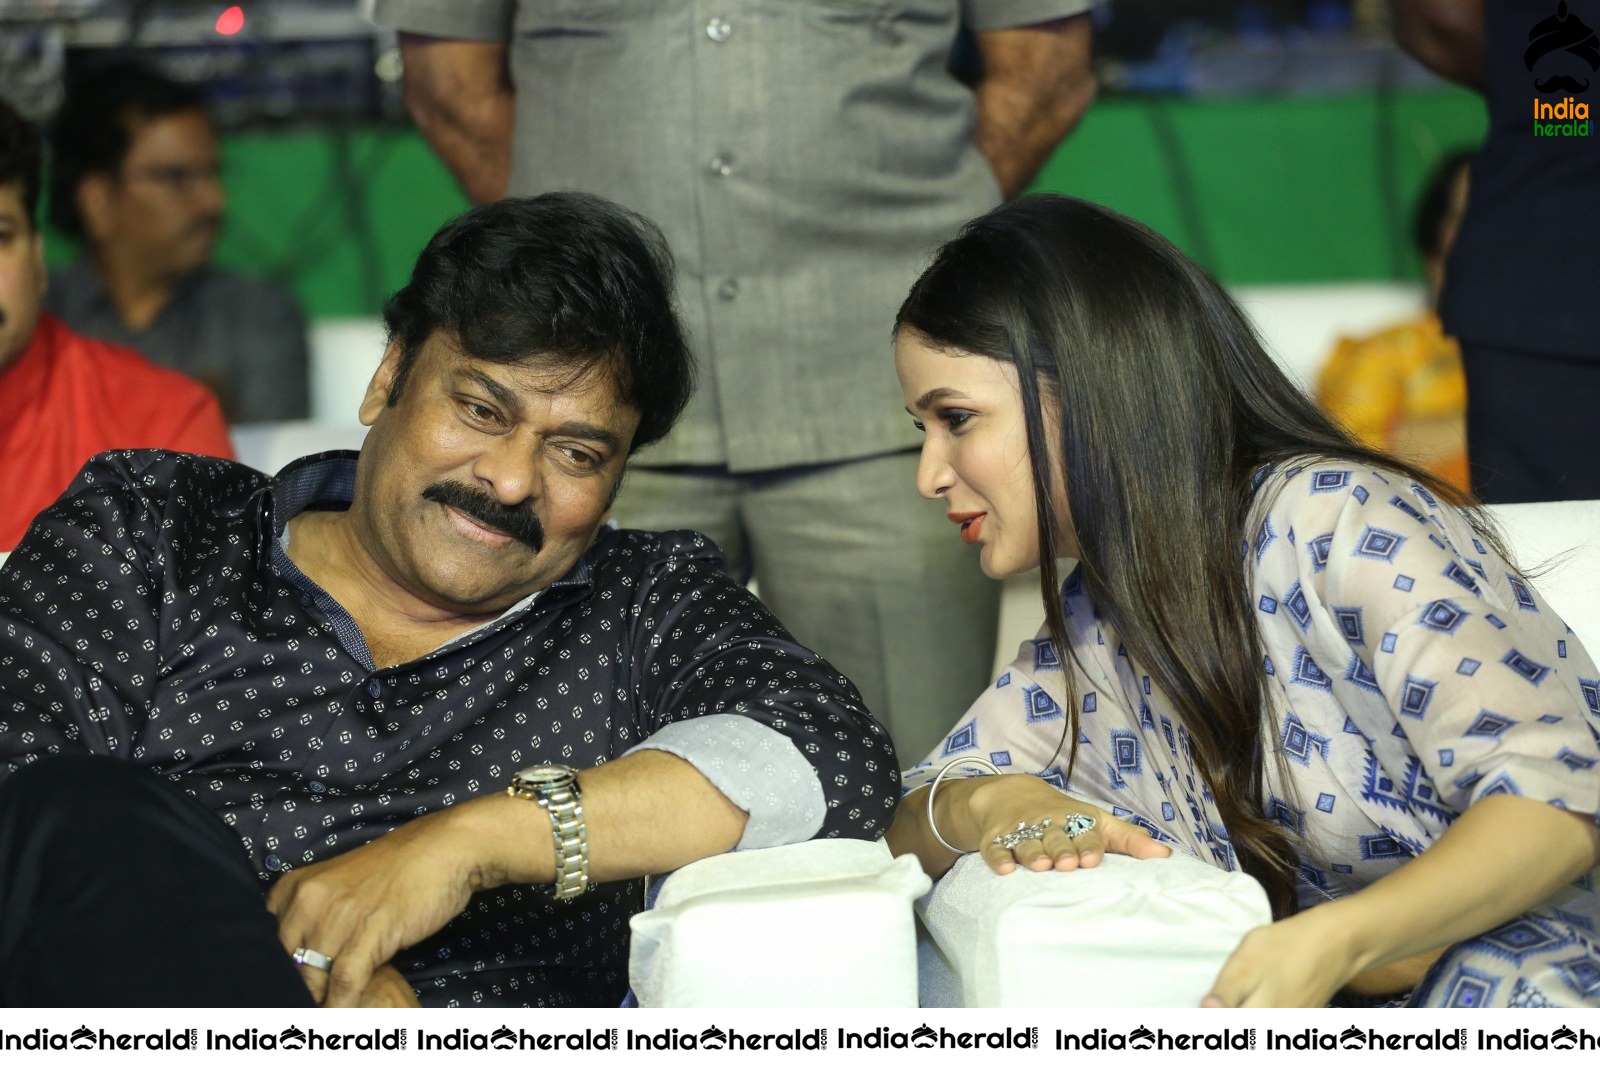 Actor Chiranjeevi has a funny chat with Lavanya Tripathi Set 2